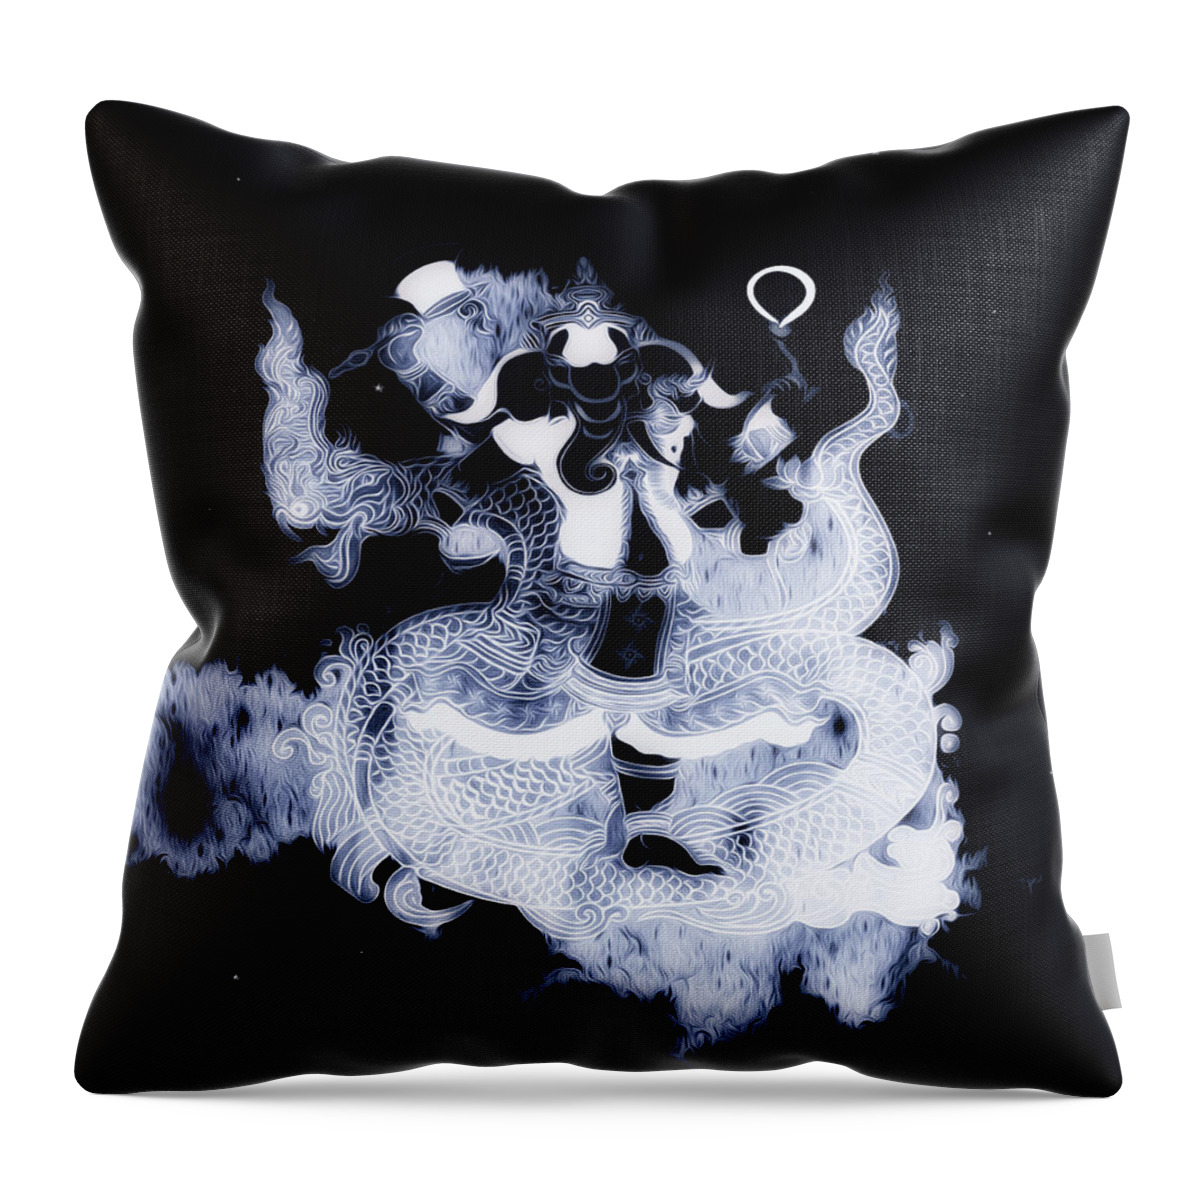 Ganesh Throw Pillow featuring the digital art Self The Totality by Jeff Malderez